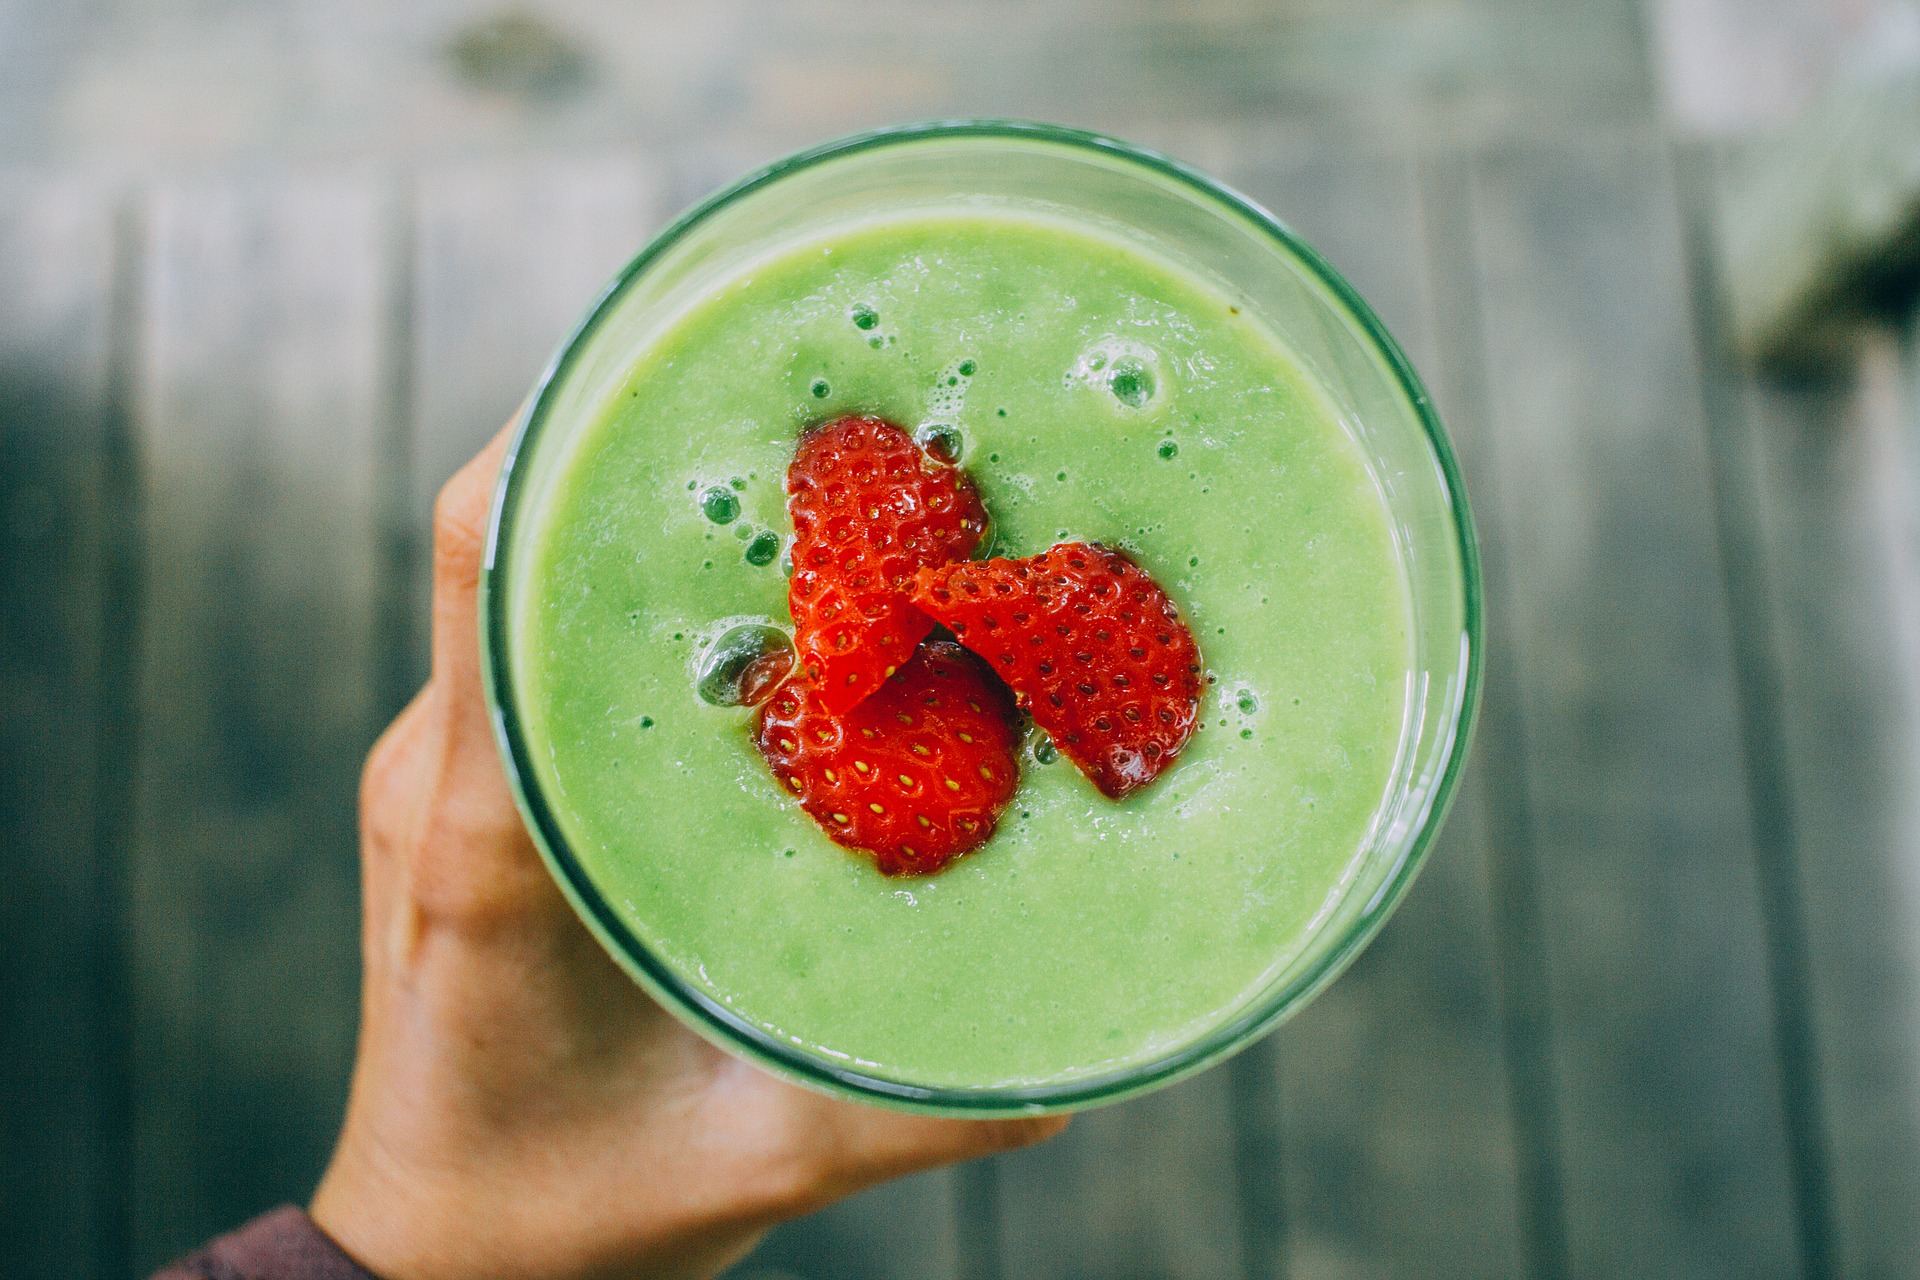 https://letsbemerry.com/wp-content/uploads/2018/01/a-green-smoothie-is-packed-with-nutrition-and-antioxidants.jpg